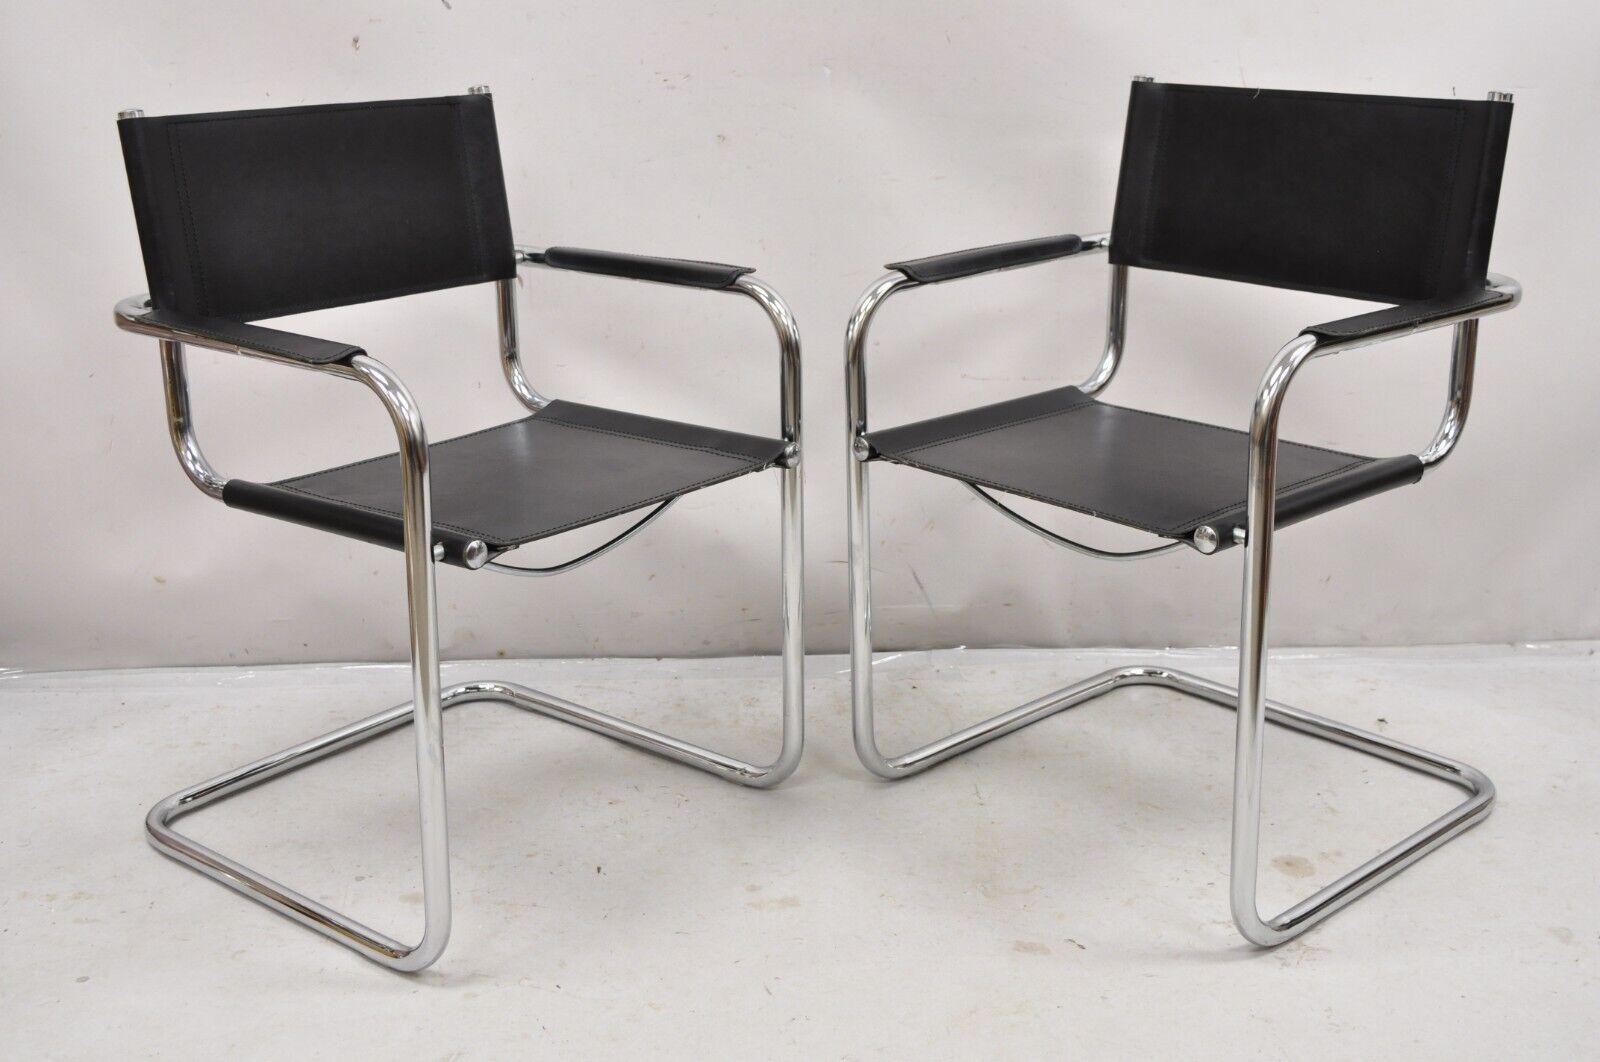 Vtg Italian Model S34 Arm Chair after Mart Stam for Cesca Black Leather - Pair For Sale 4